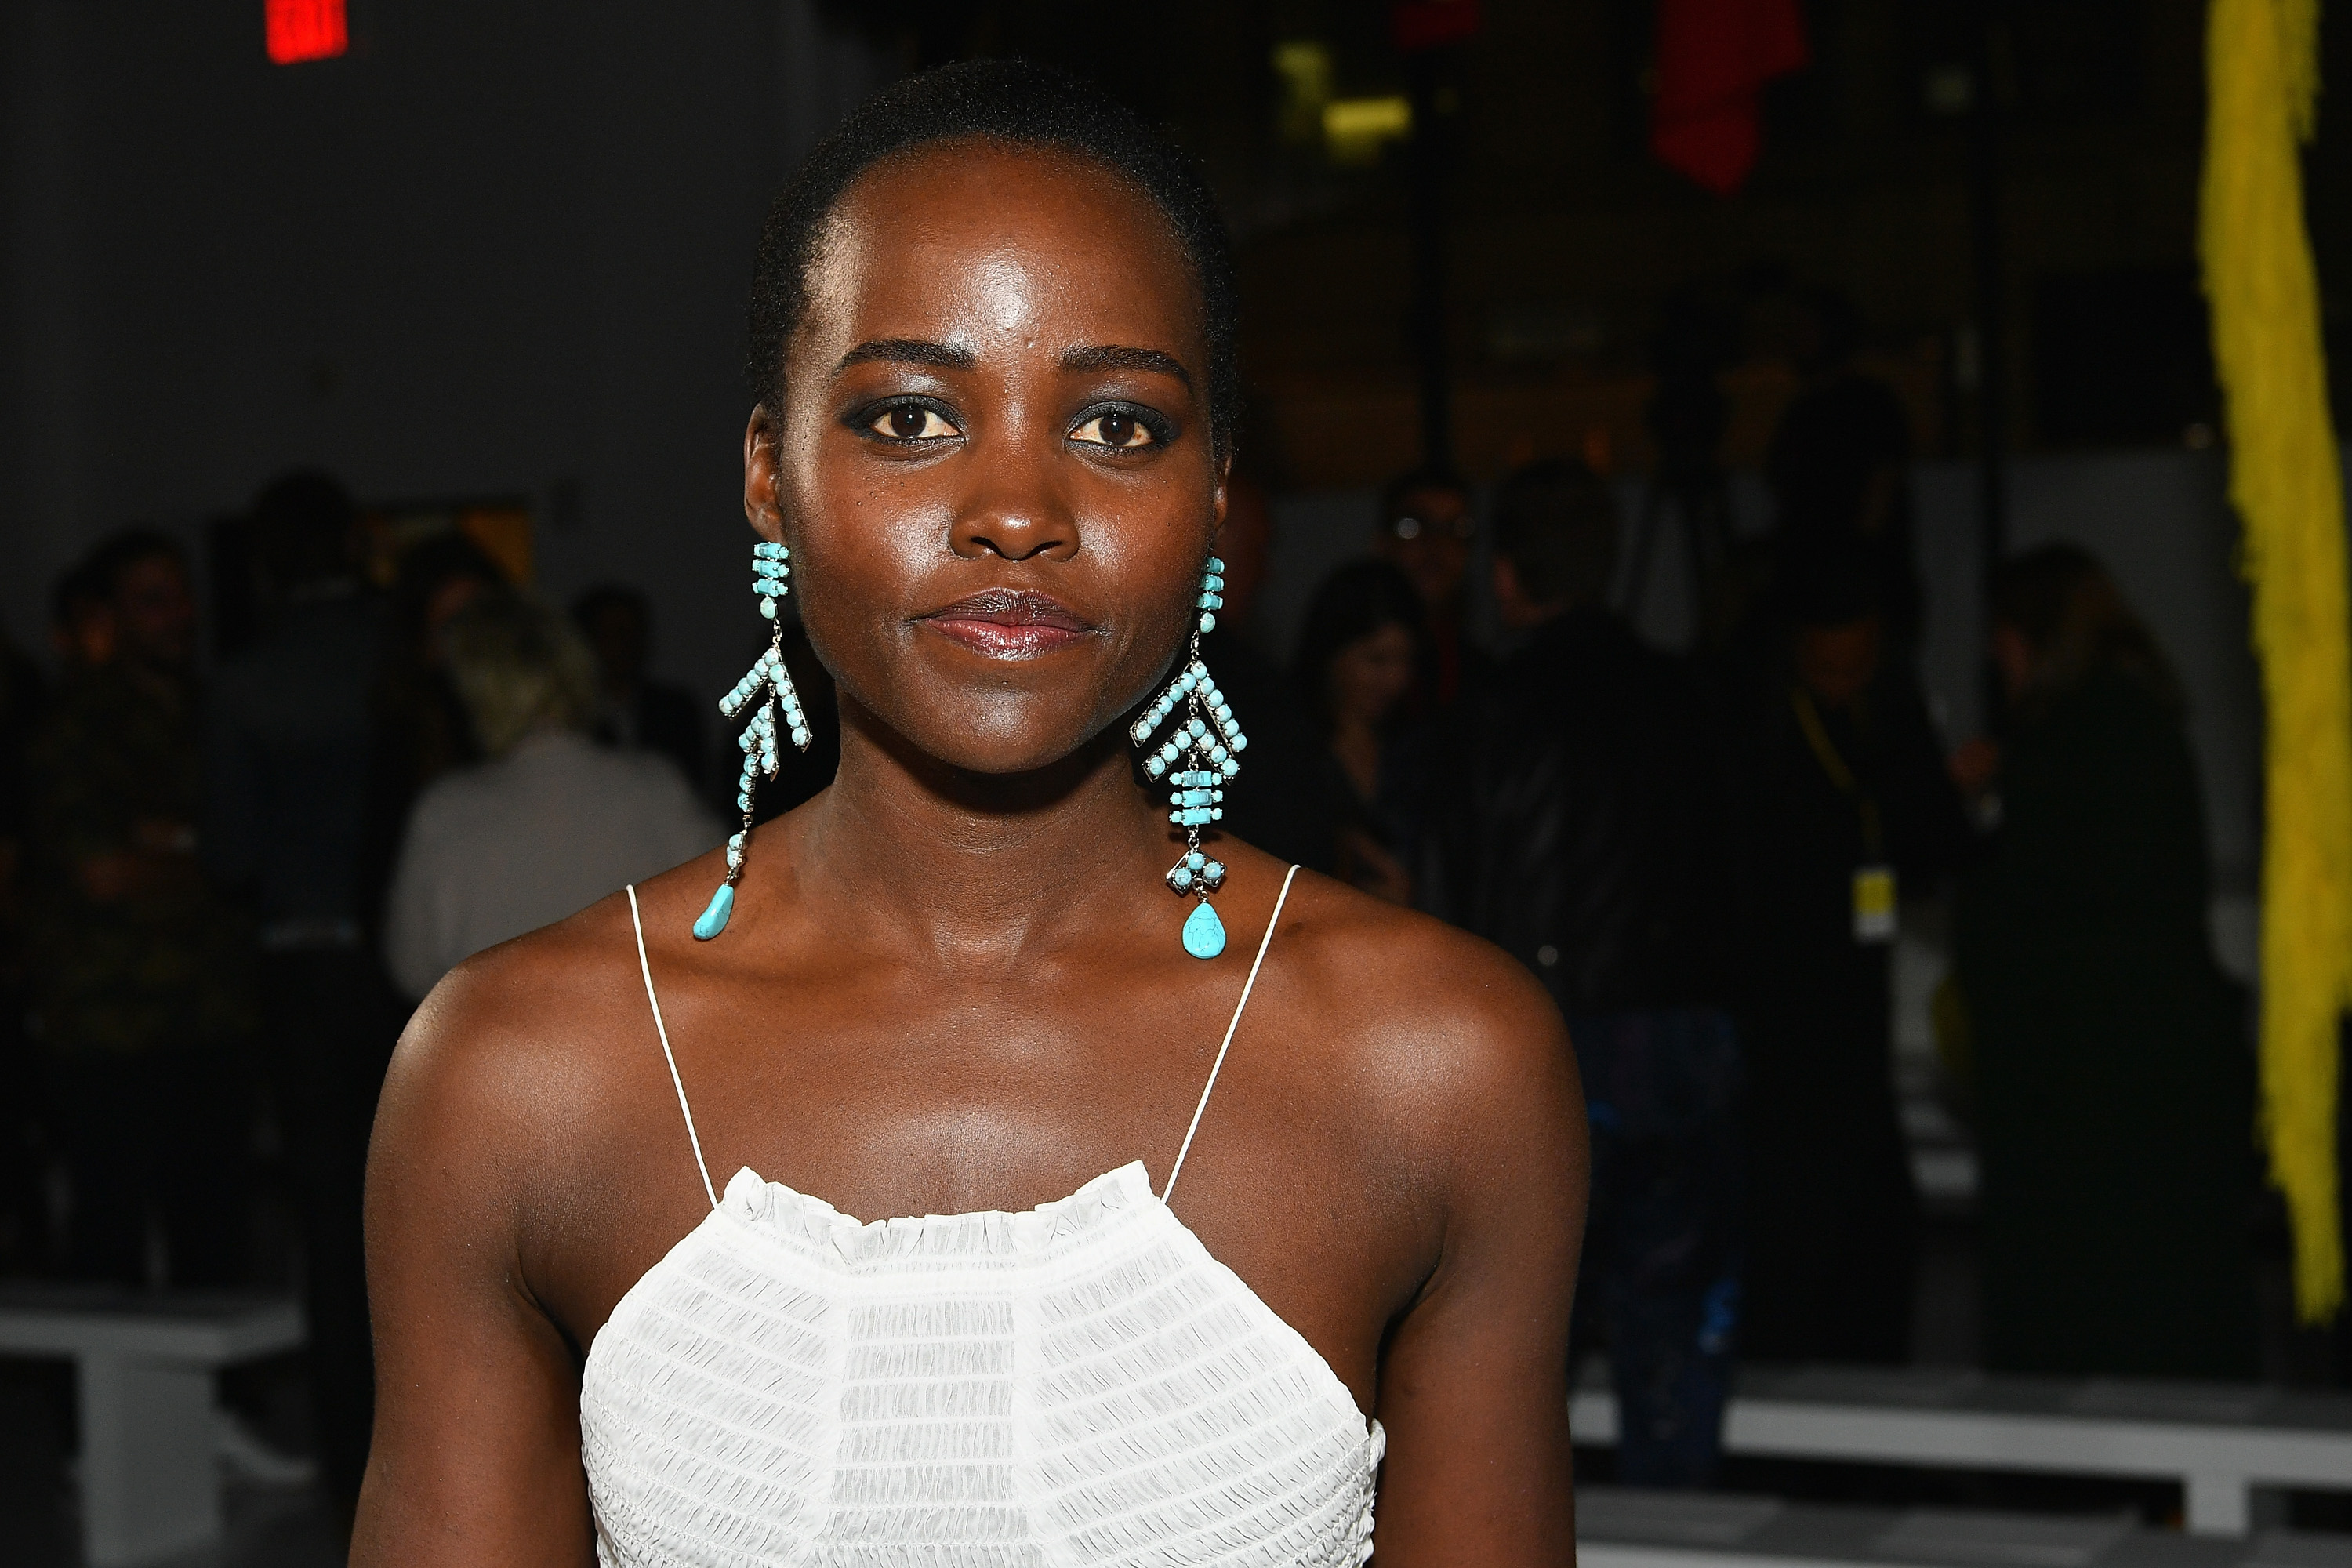 Actress Lupita Nyong'o attends the Calvin Klein Collection fashion show during New York Fashion Week on Sep. 7, 2017 in New York City. (Dia Dipasupil—Getty Images)